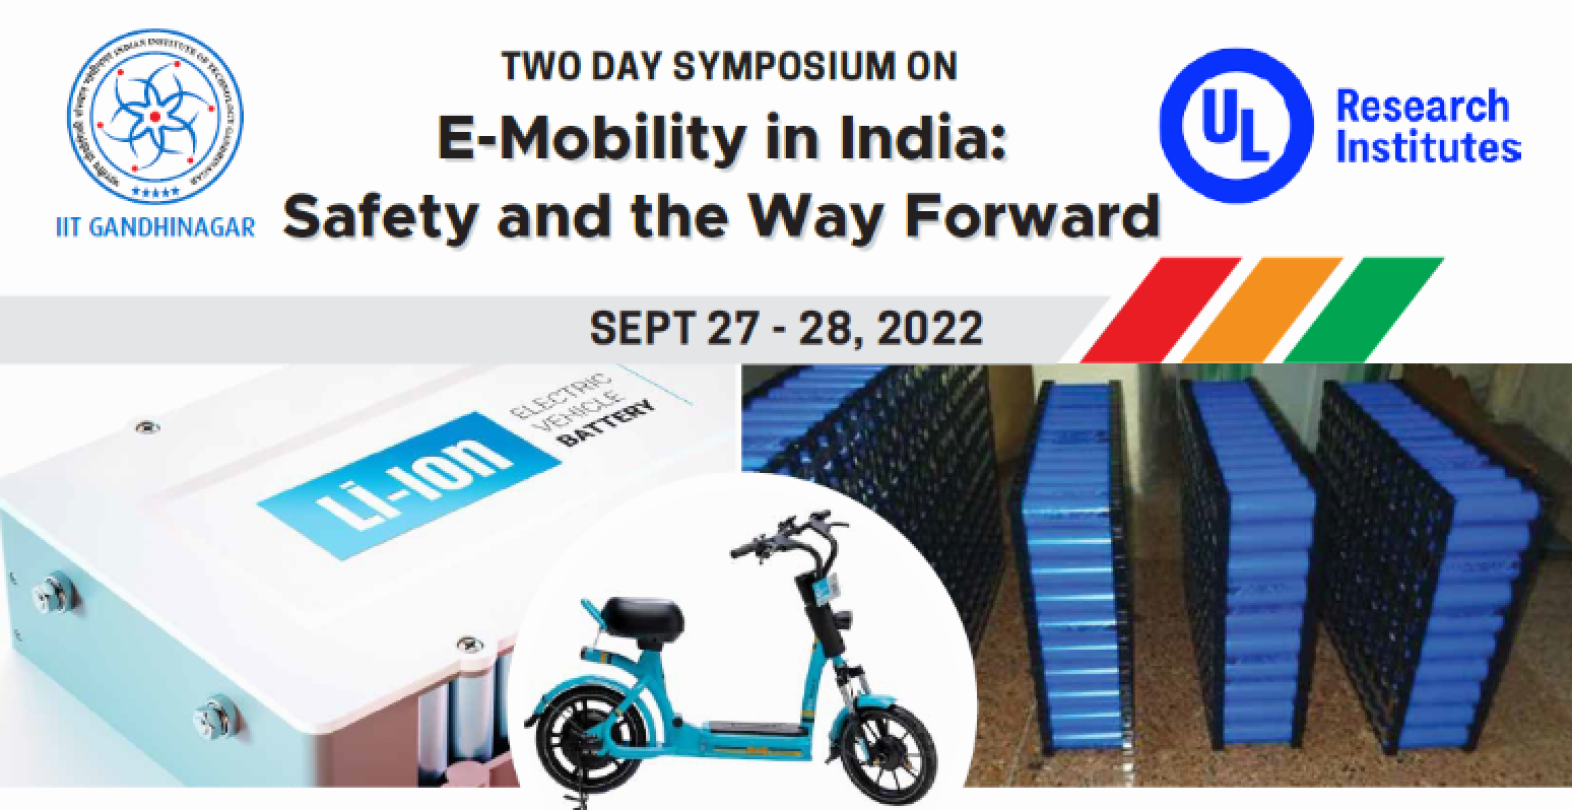 E-Mobility in India: Safety and the Way Forward 